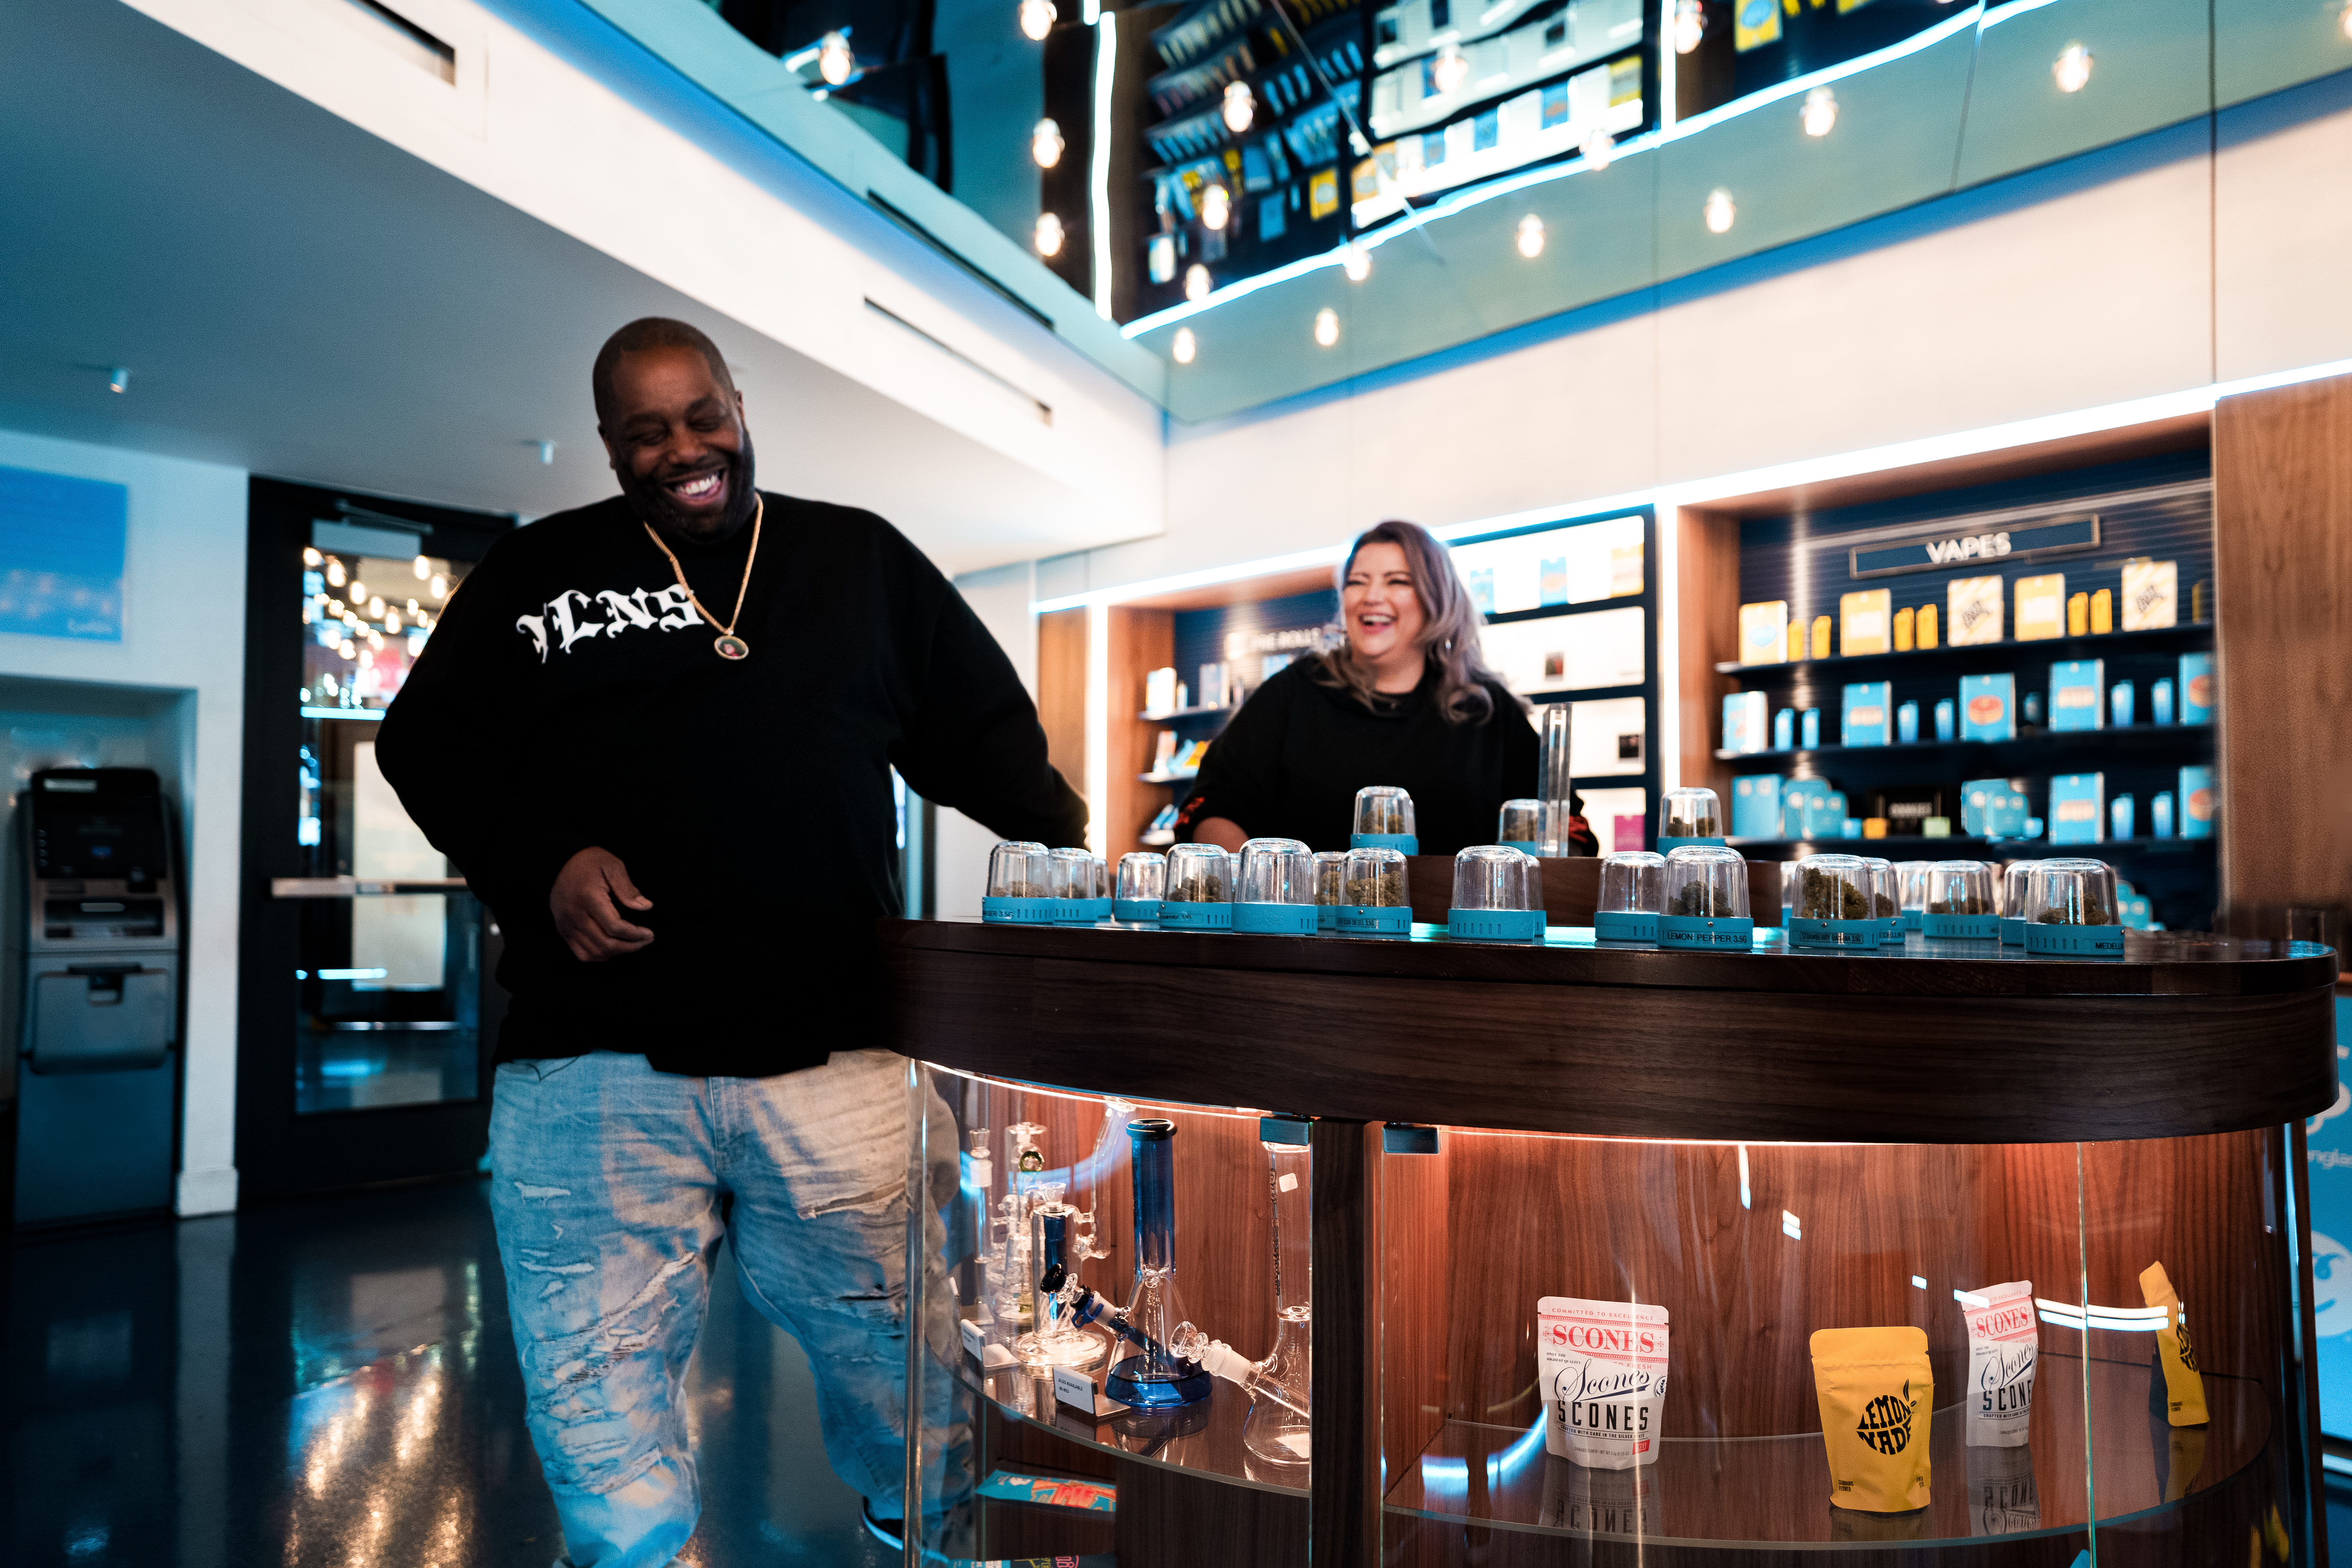 Killer Mike production stills from Weedmaps documentary